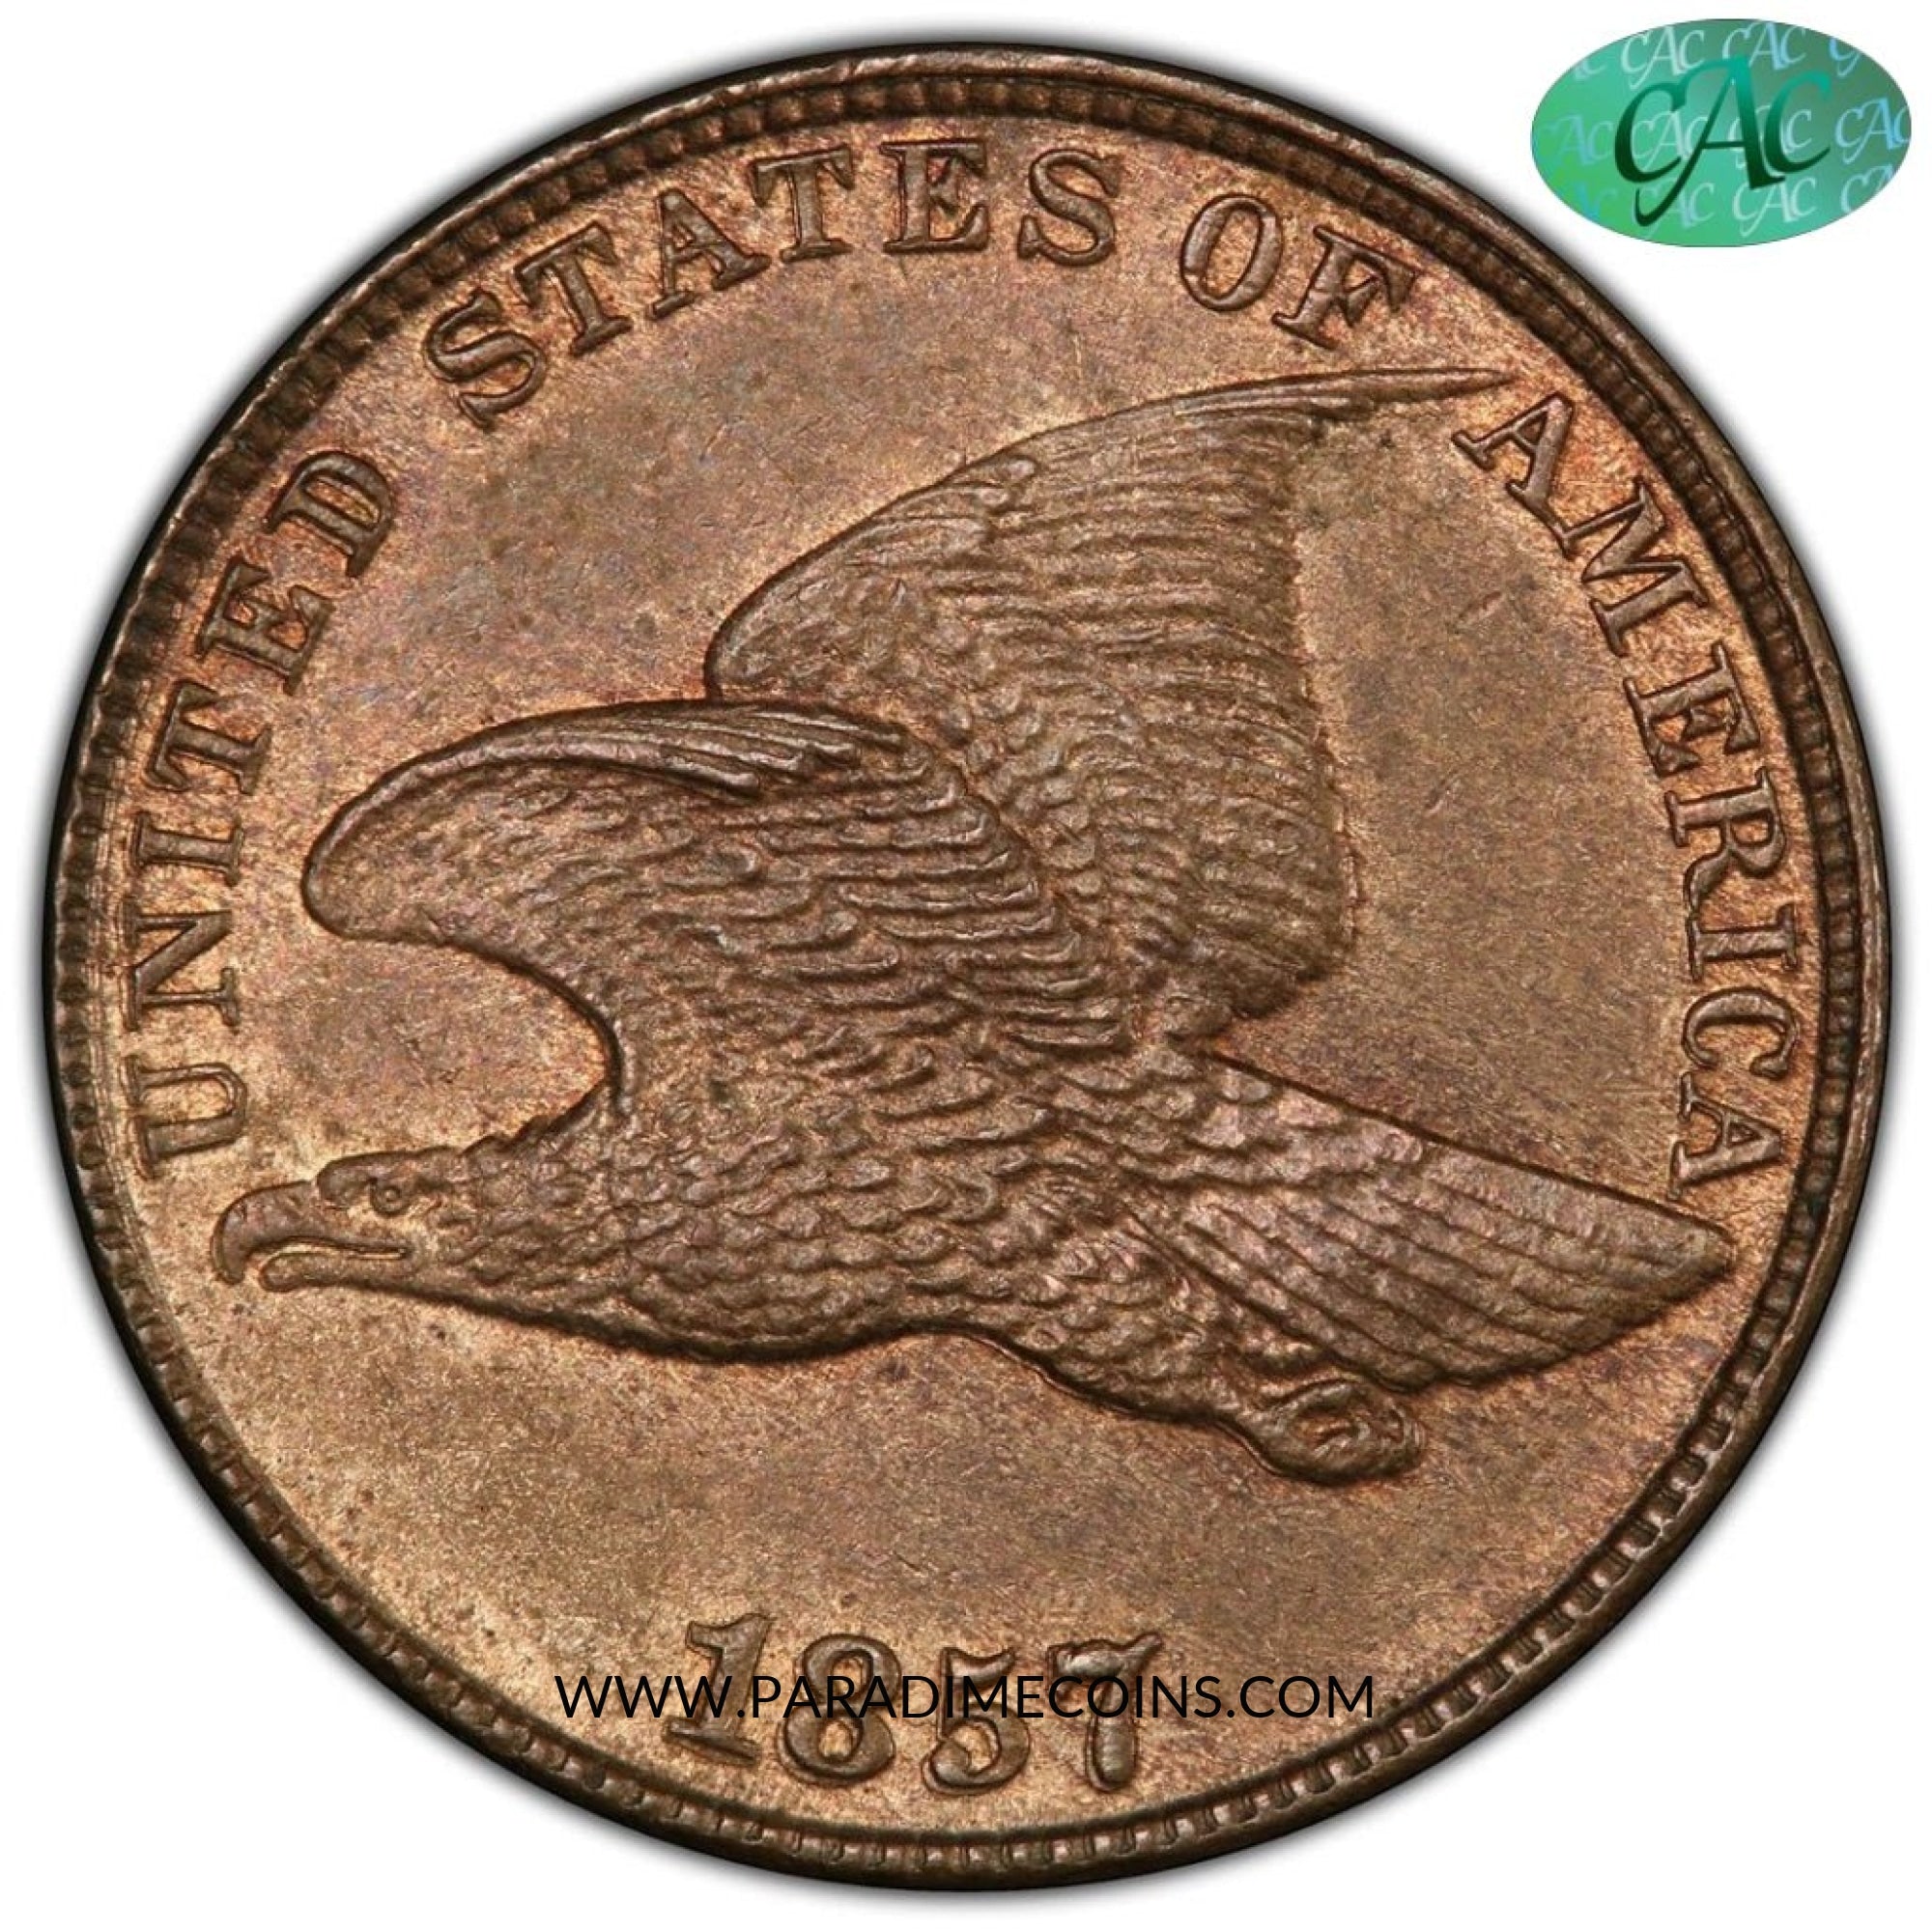 1857 1C FLYING EAGLE MS63 PCGS CAC EEPS - Paradime Coins | PCGS NGC CACG CAC Rare US Numismatic Coins For Sale